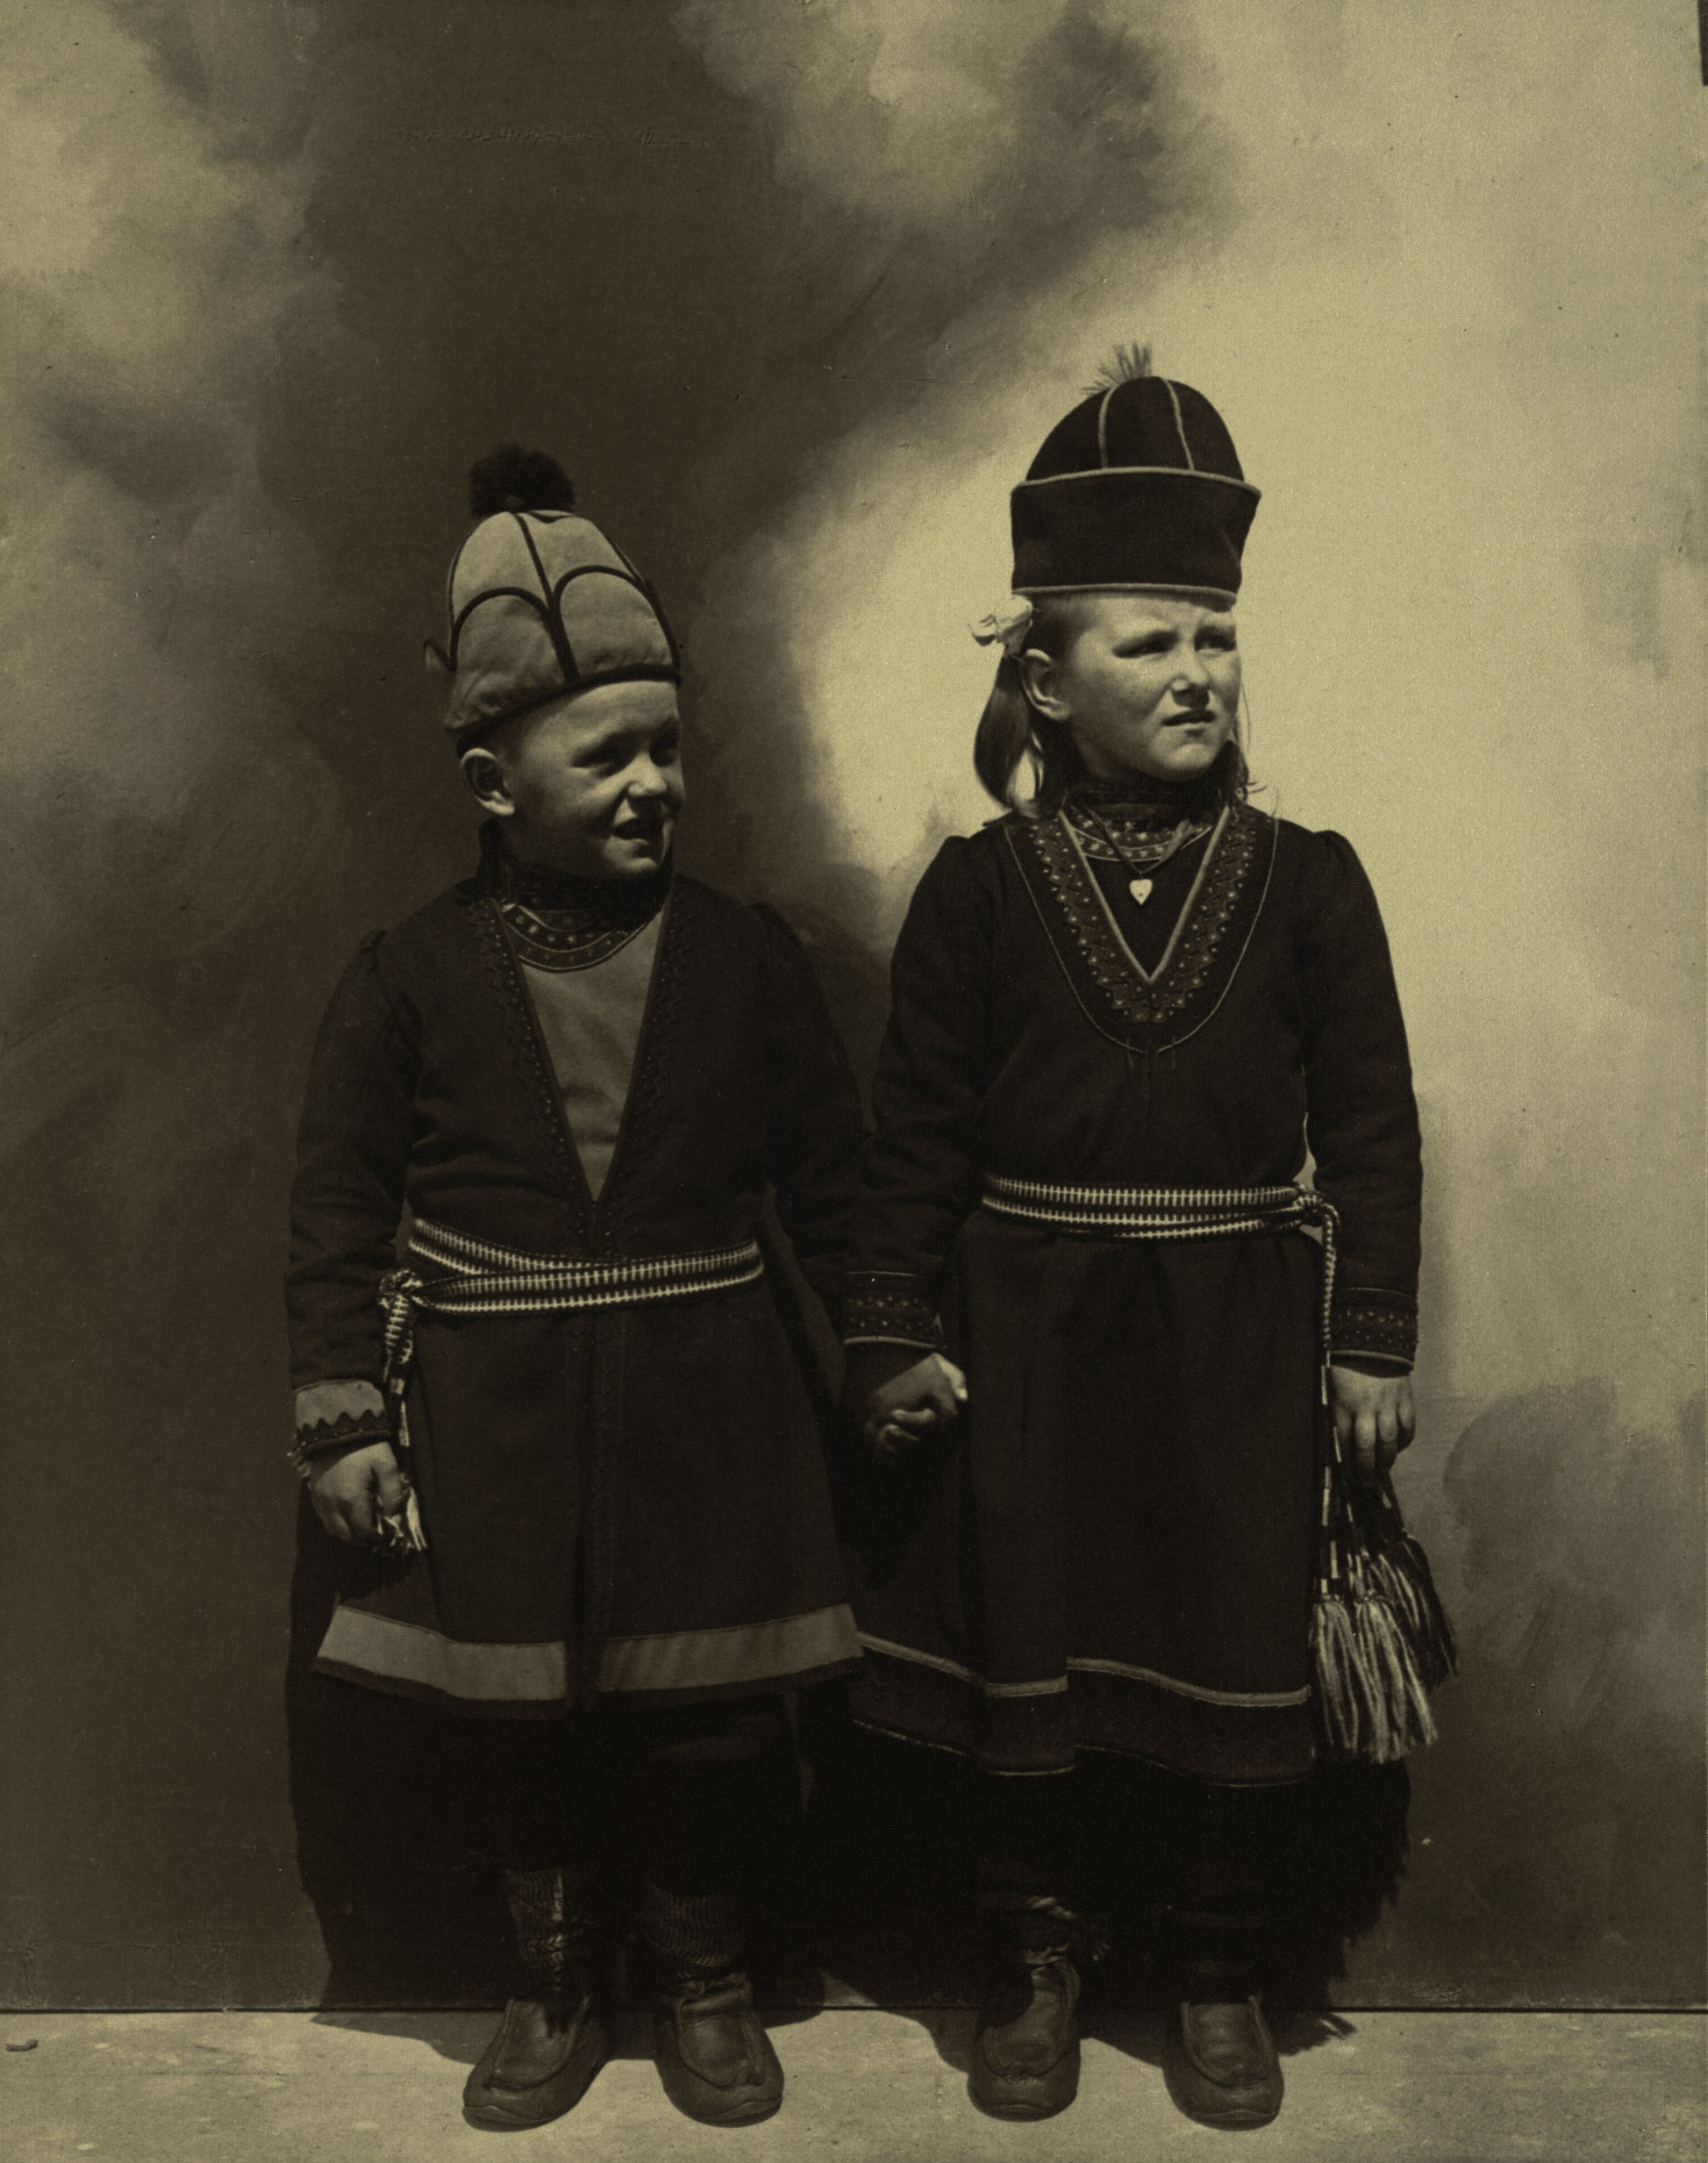 Portrait of Lapland children, possibly from Sweden at the Ellis Island Immigration Station, circa 1905-1914.